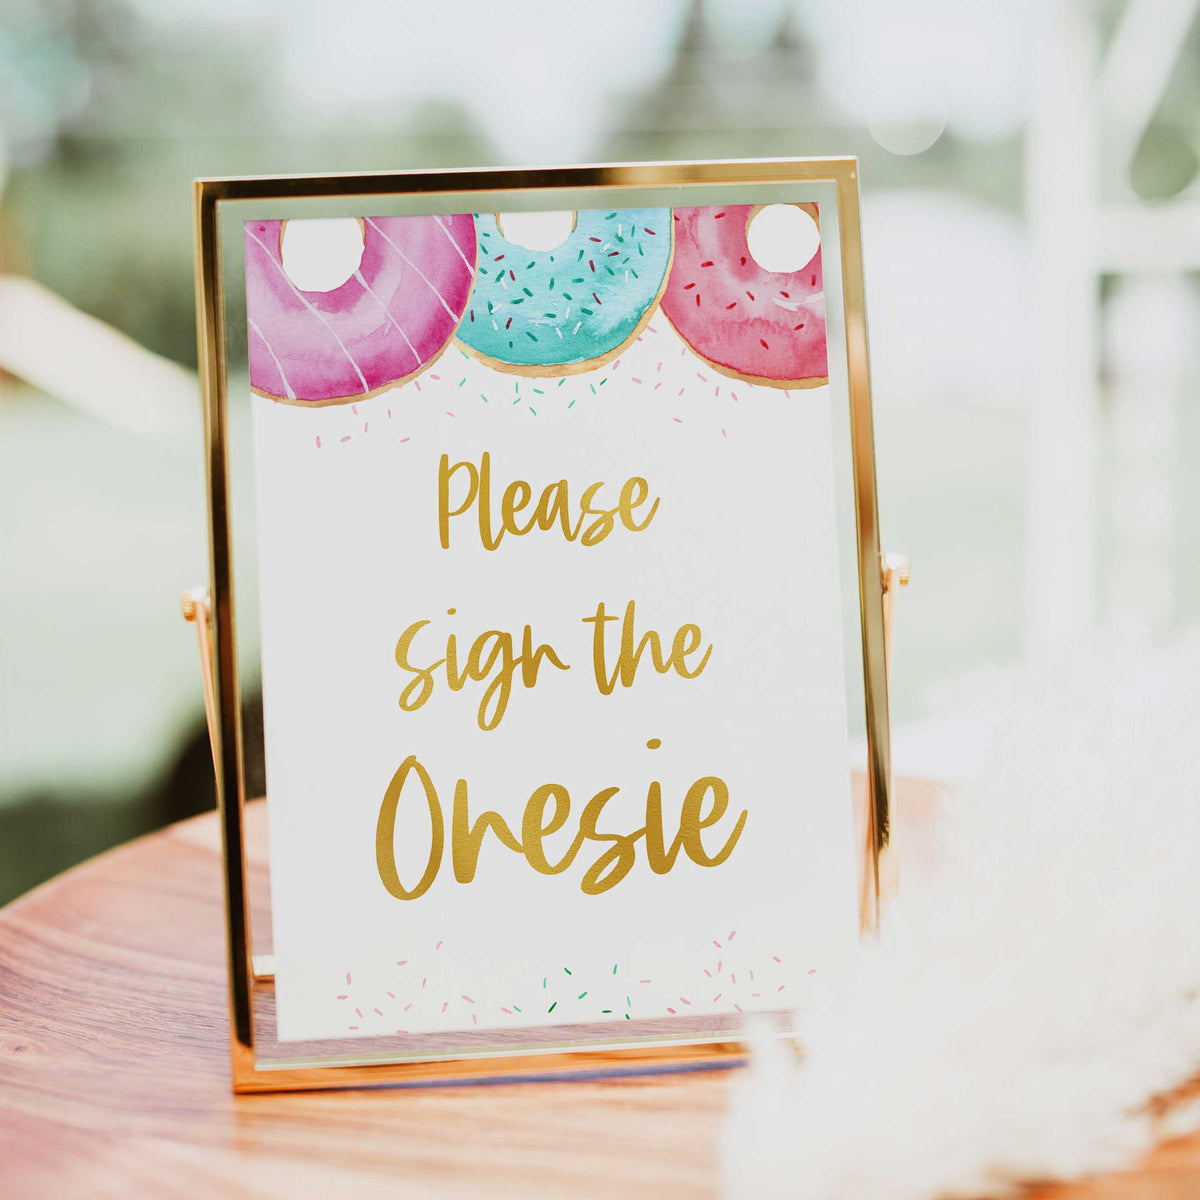 please sign the onesie sign, Printable baby shower games, donut baby games, baby shower games, fun baby shower ideas, top baby shower ideas, donut sprinkles baby shower, baby shower games, fun donut baby shower ideas